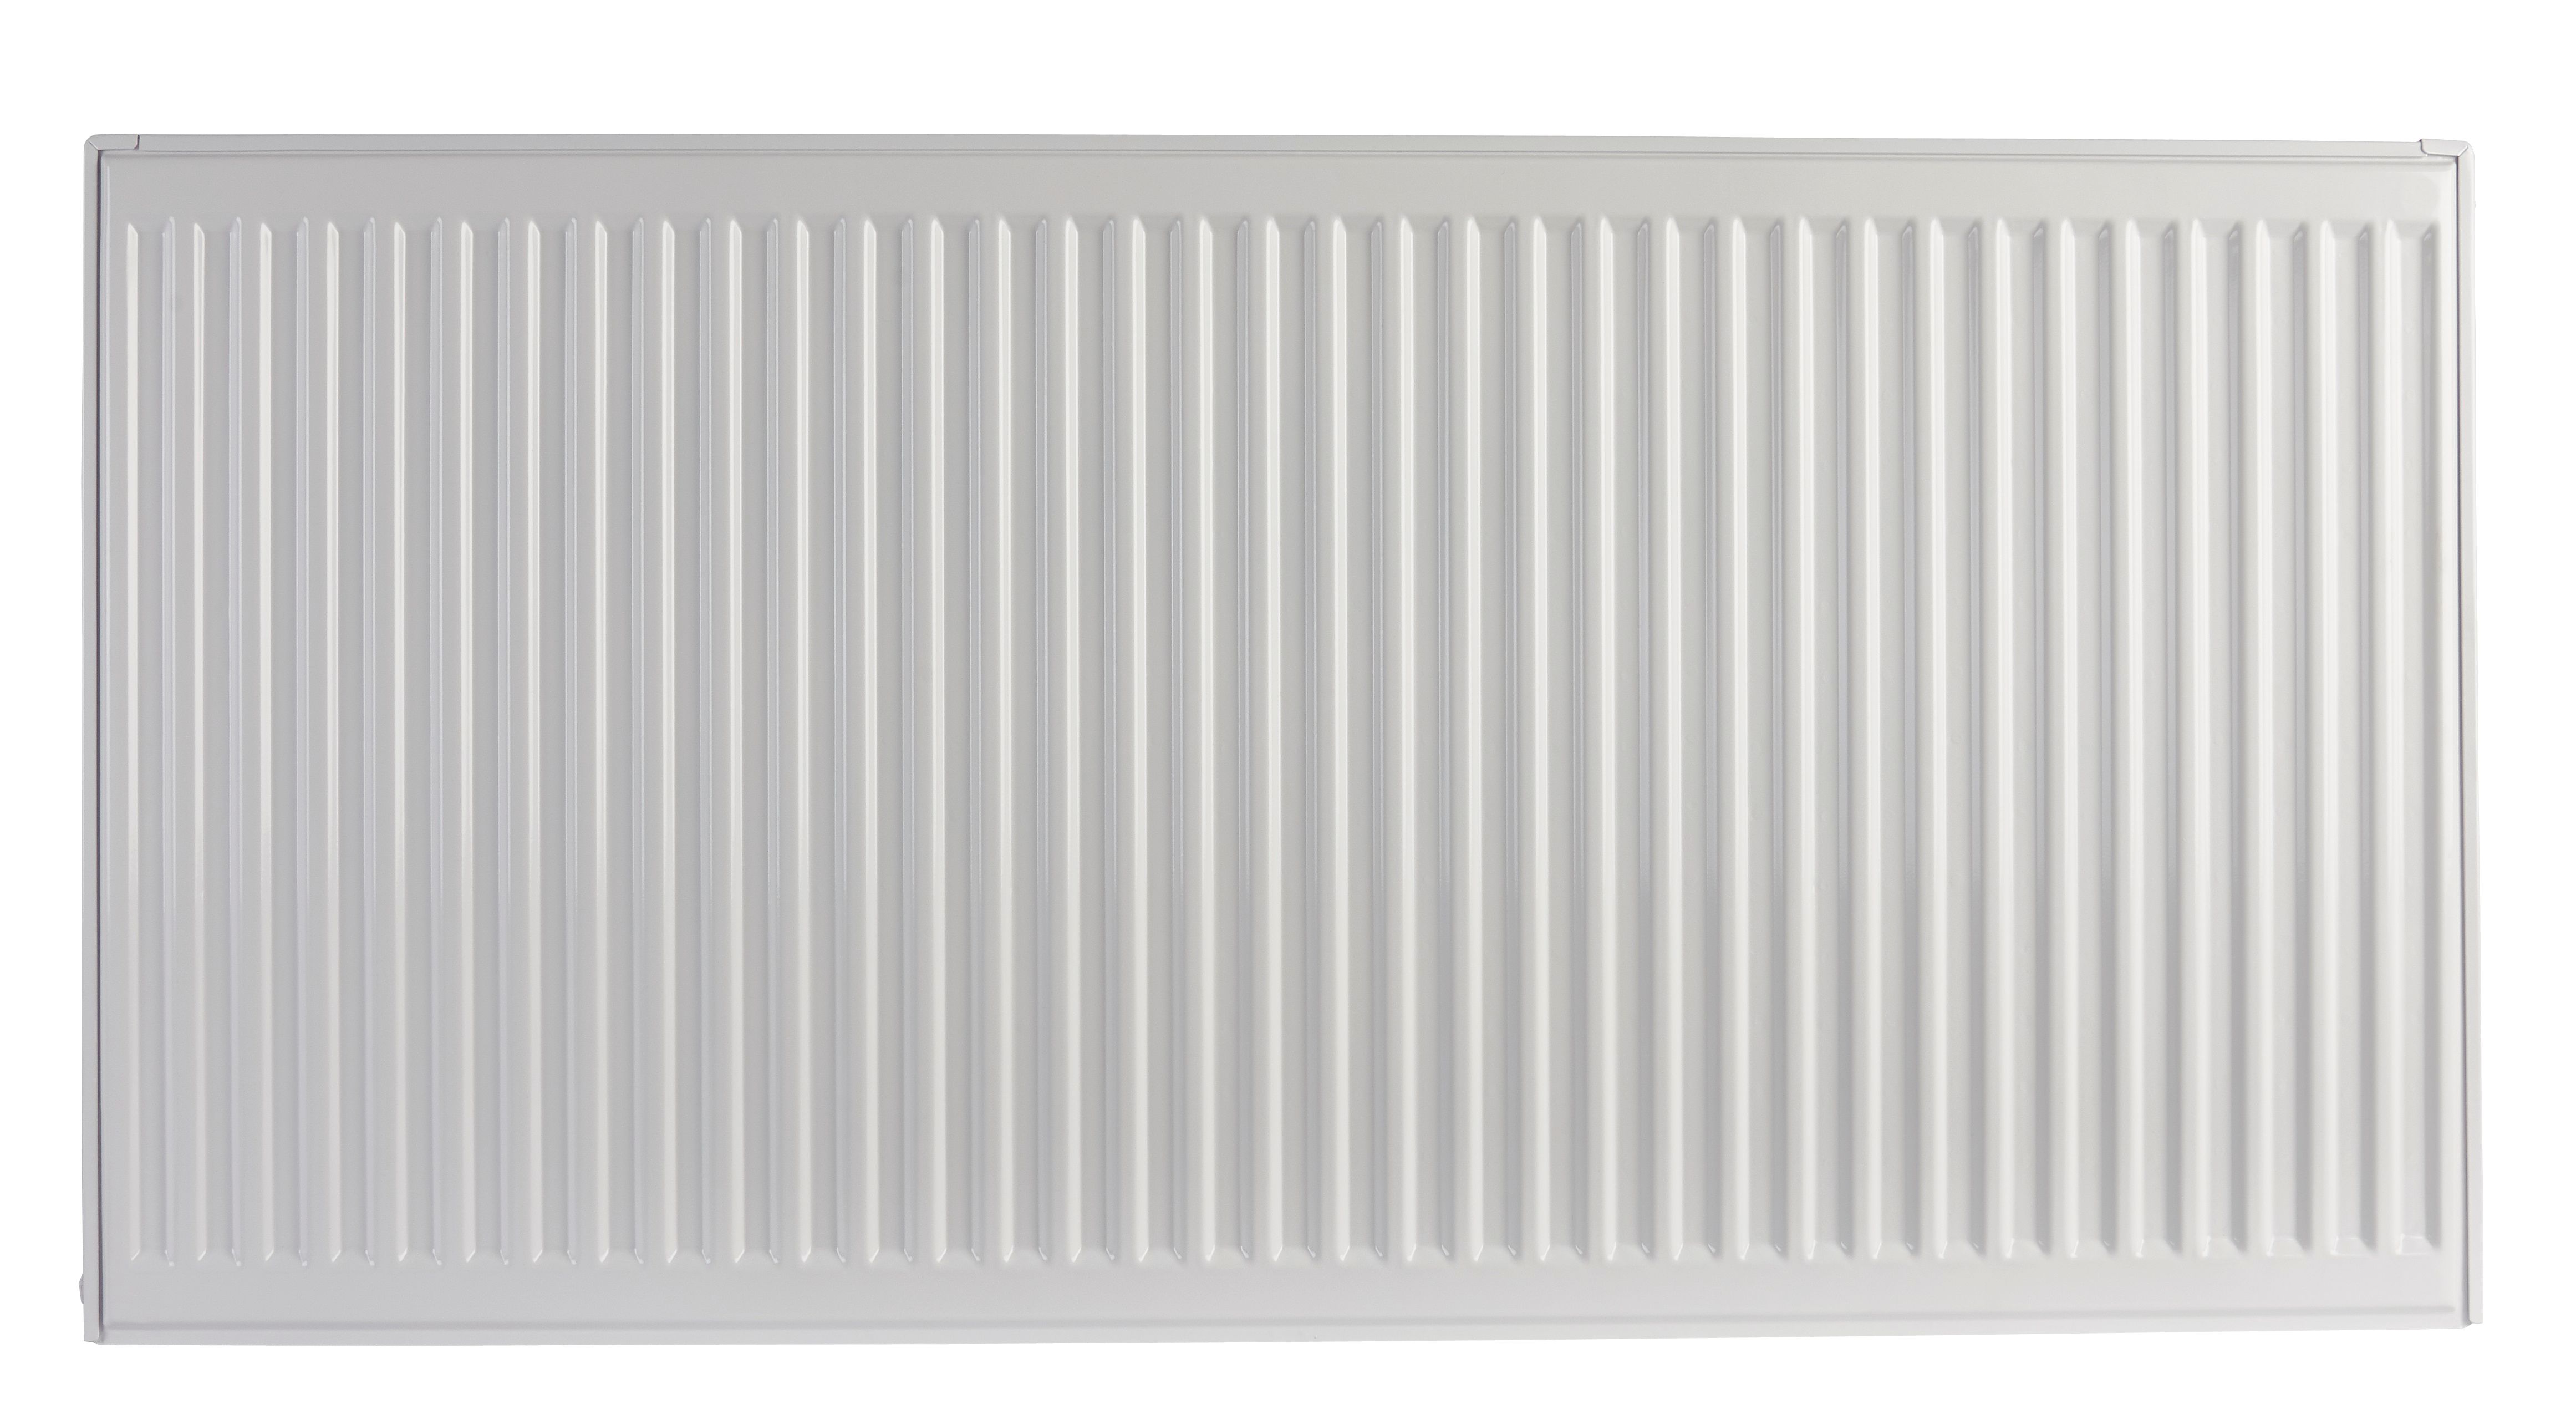 Image of Homeline by Stelrad 500 x 1400mm Type 22 Double Panel Premium Double Convector Radiator